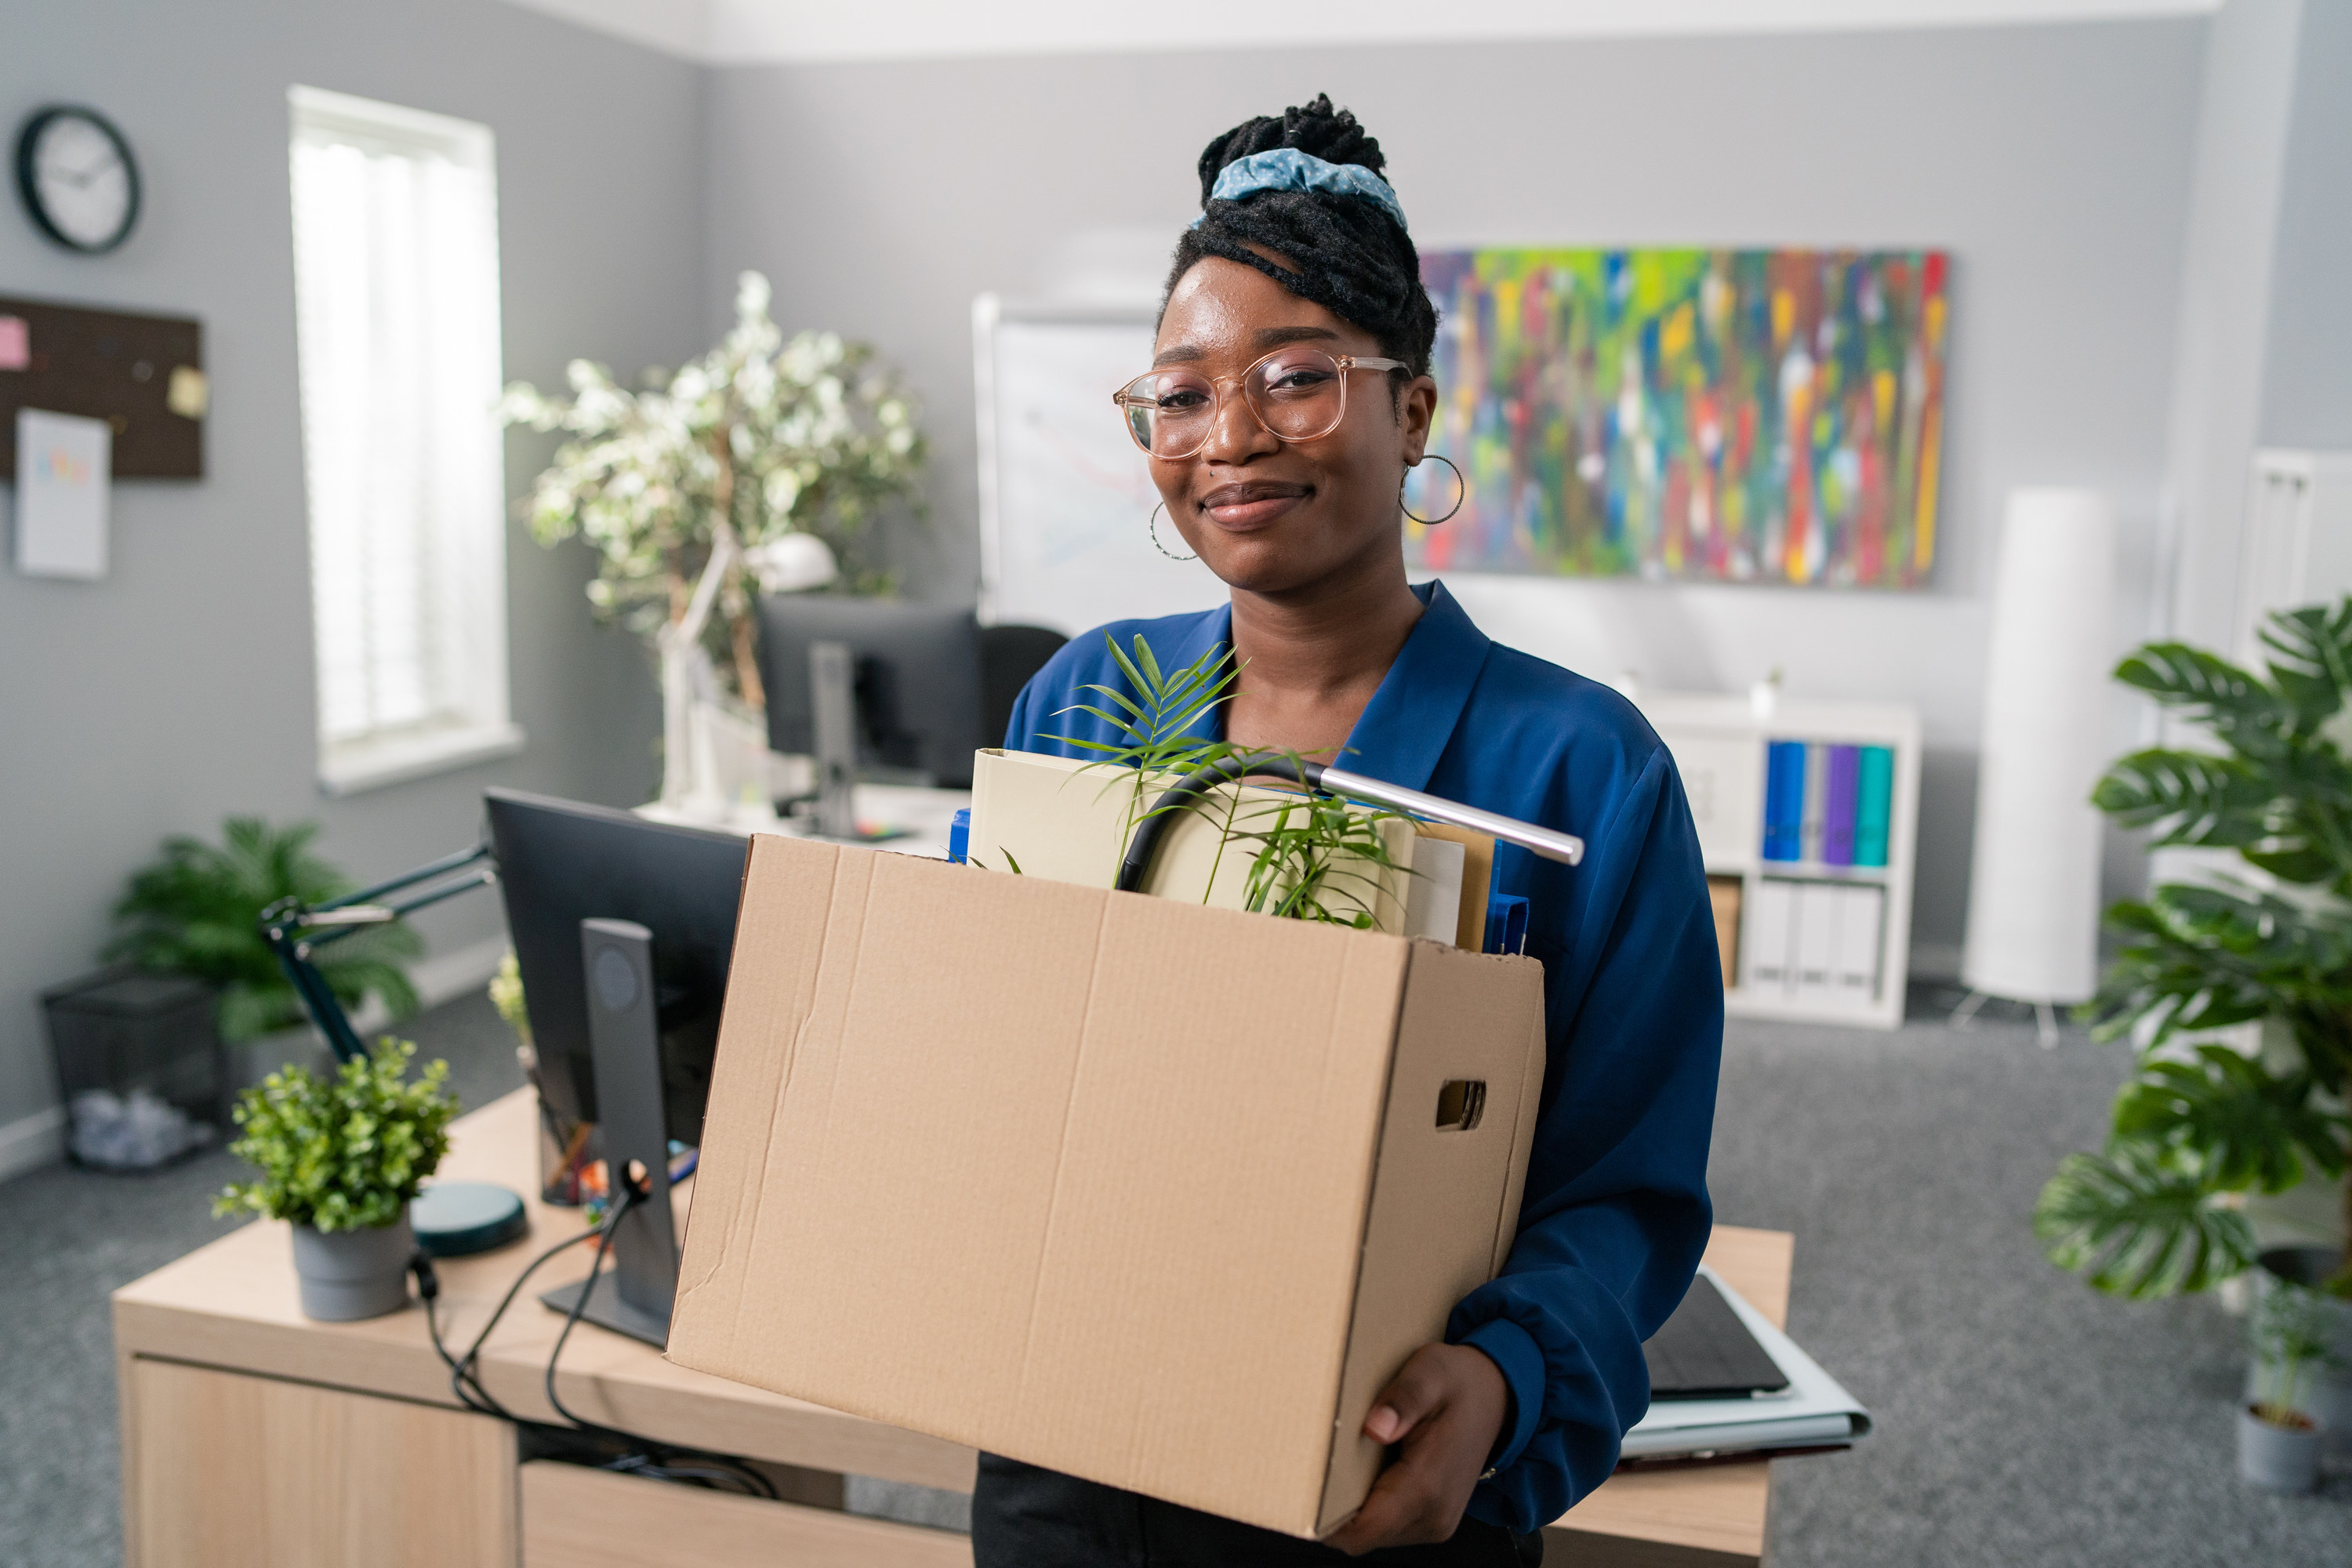 Woman with box of items leaving an office